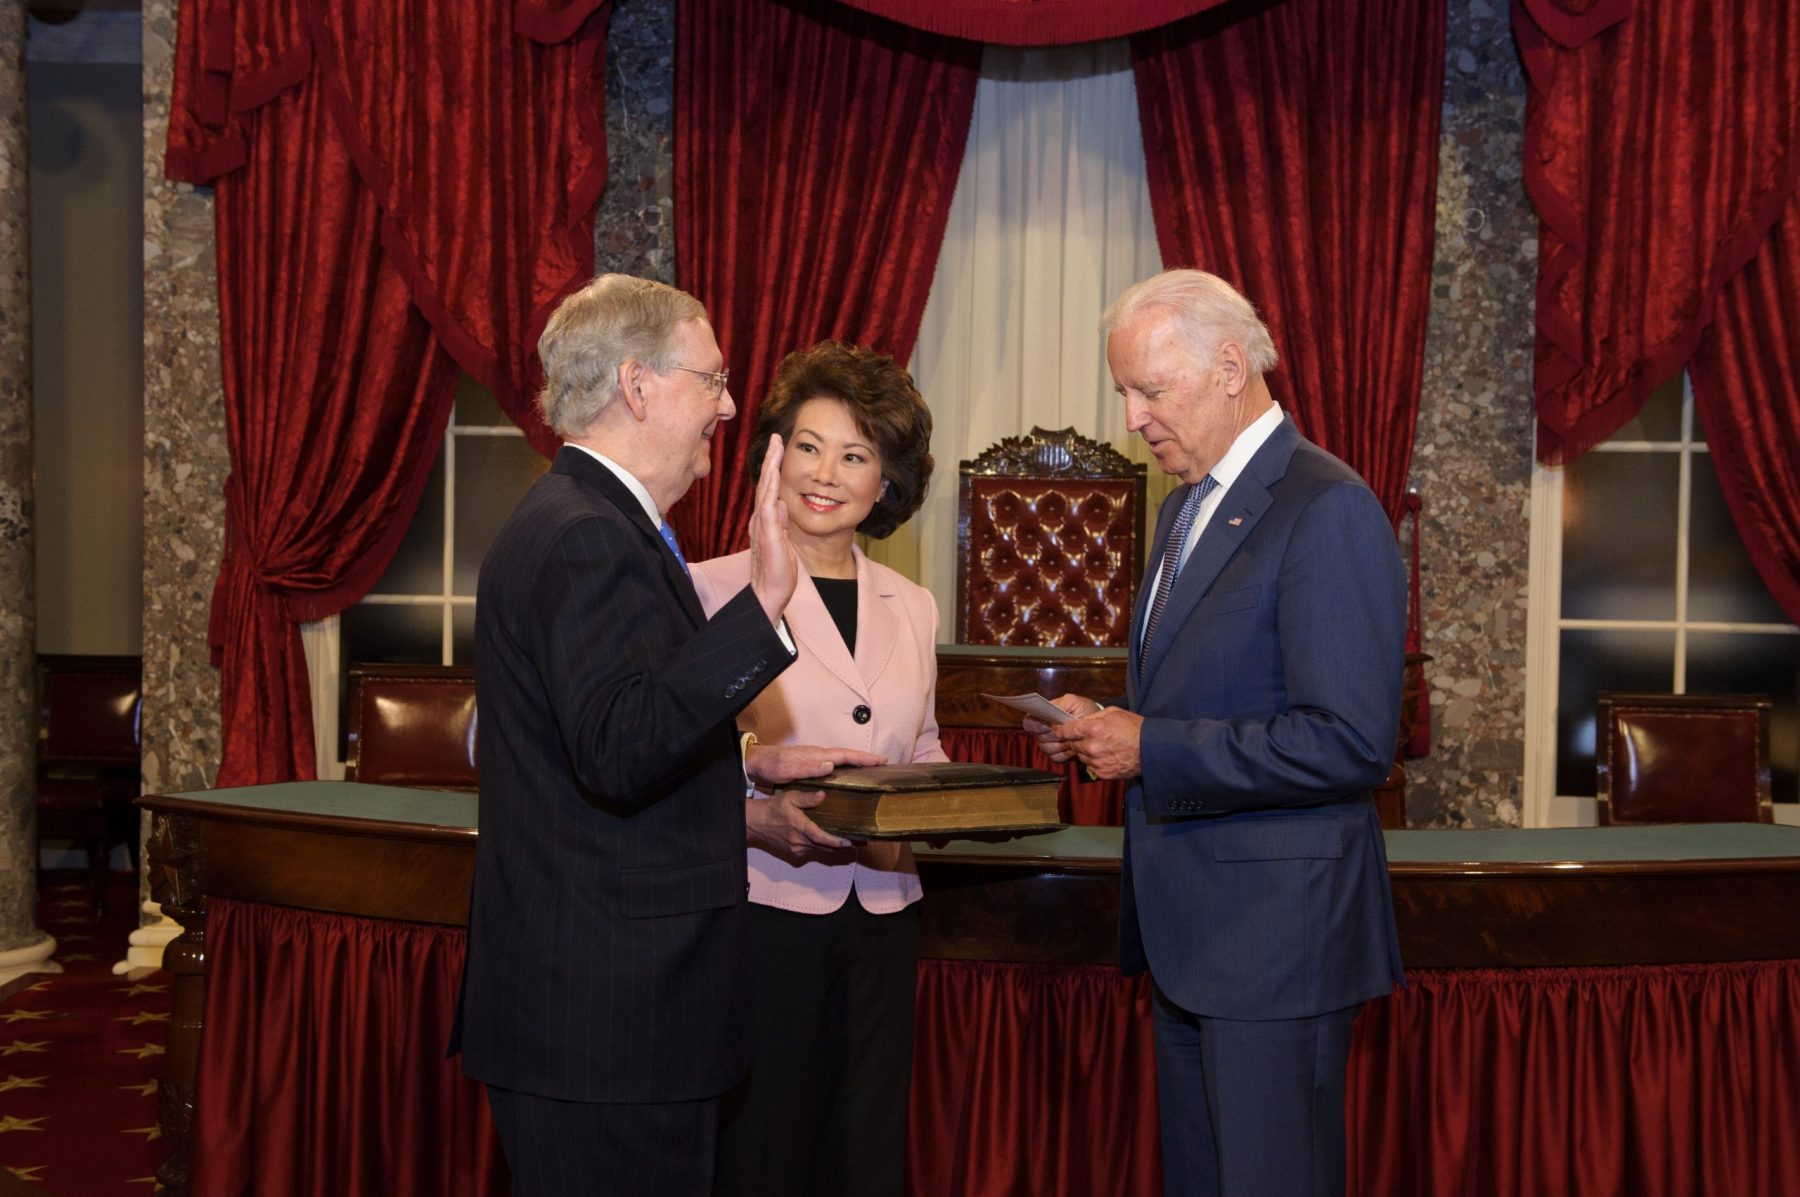 Elaine Chao holds the Bible for husband, U.S. Senate Majority Leader Mitch McConnell as he's sworn in by Vice President Biden at the U.S. Capitol.